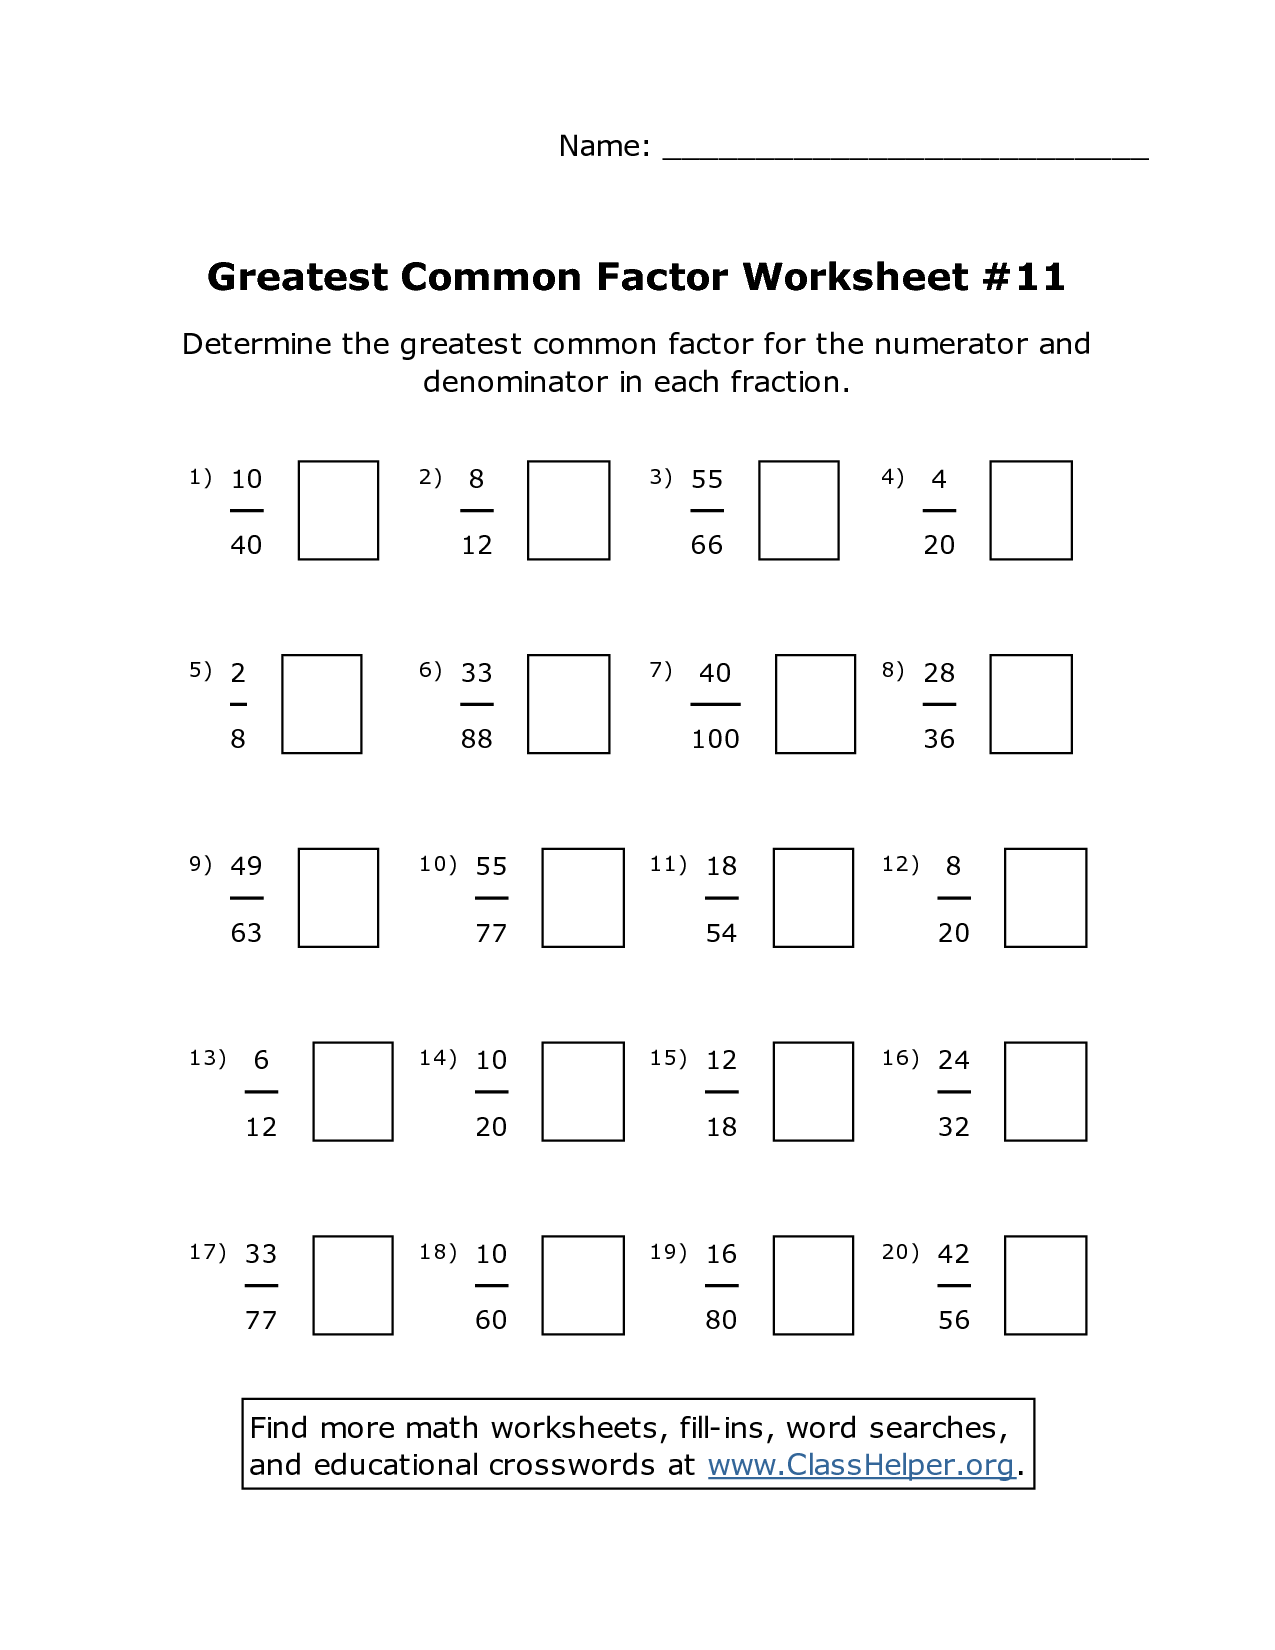 10 Best Images of Fractions Greatest Common Factors Worksheet